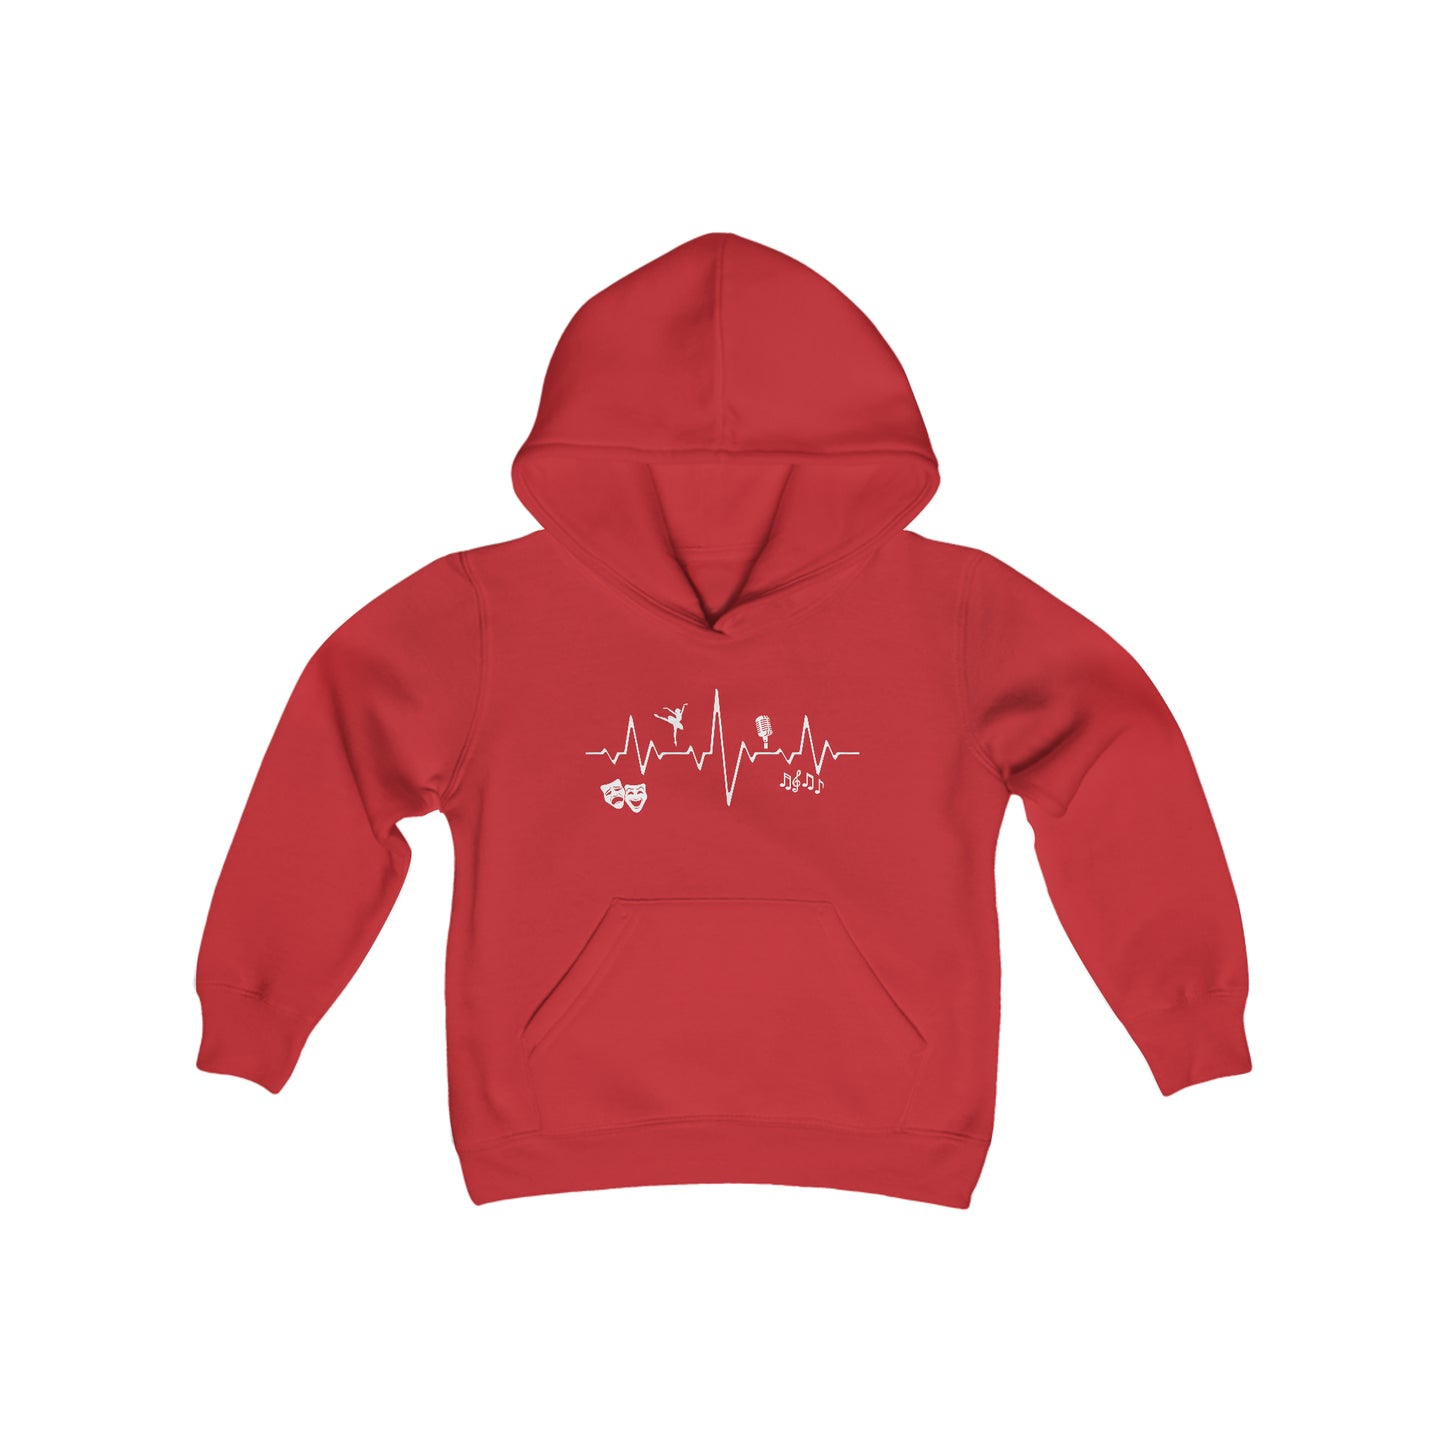 Beating Heart of Entertainment "Youth" Heavy Blend Hooded Sweatshirt